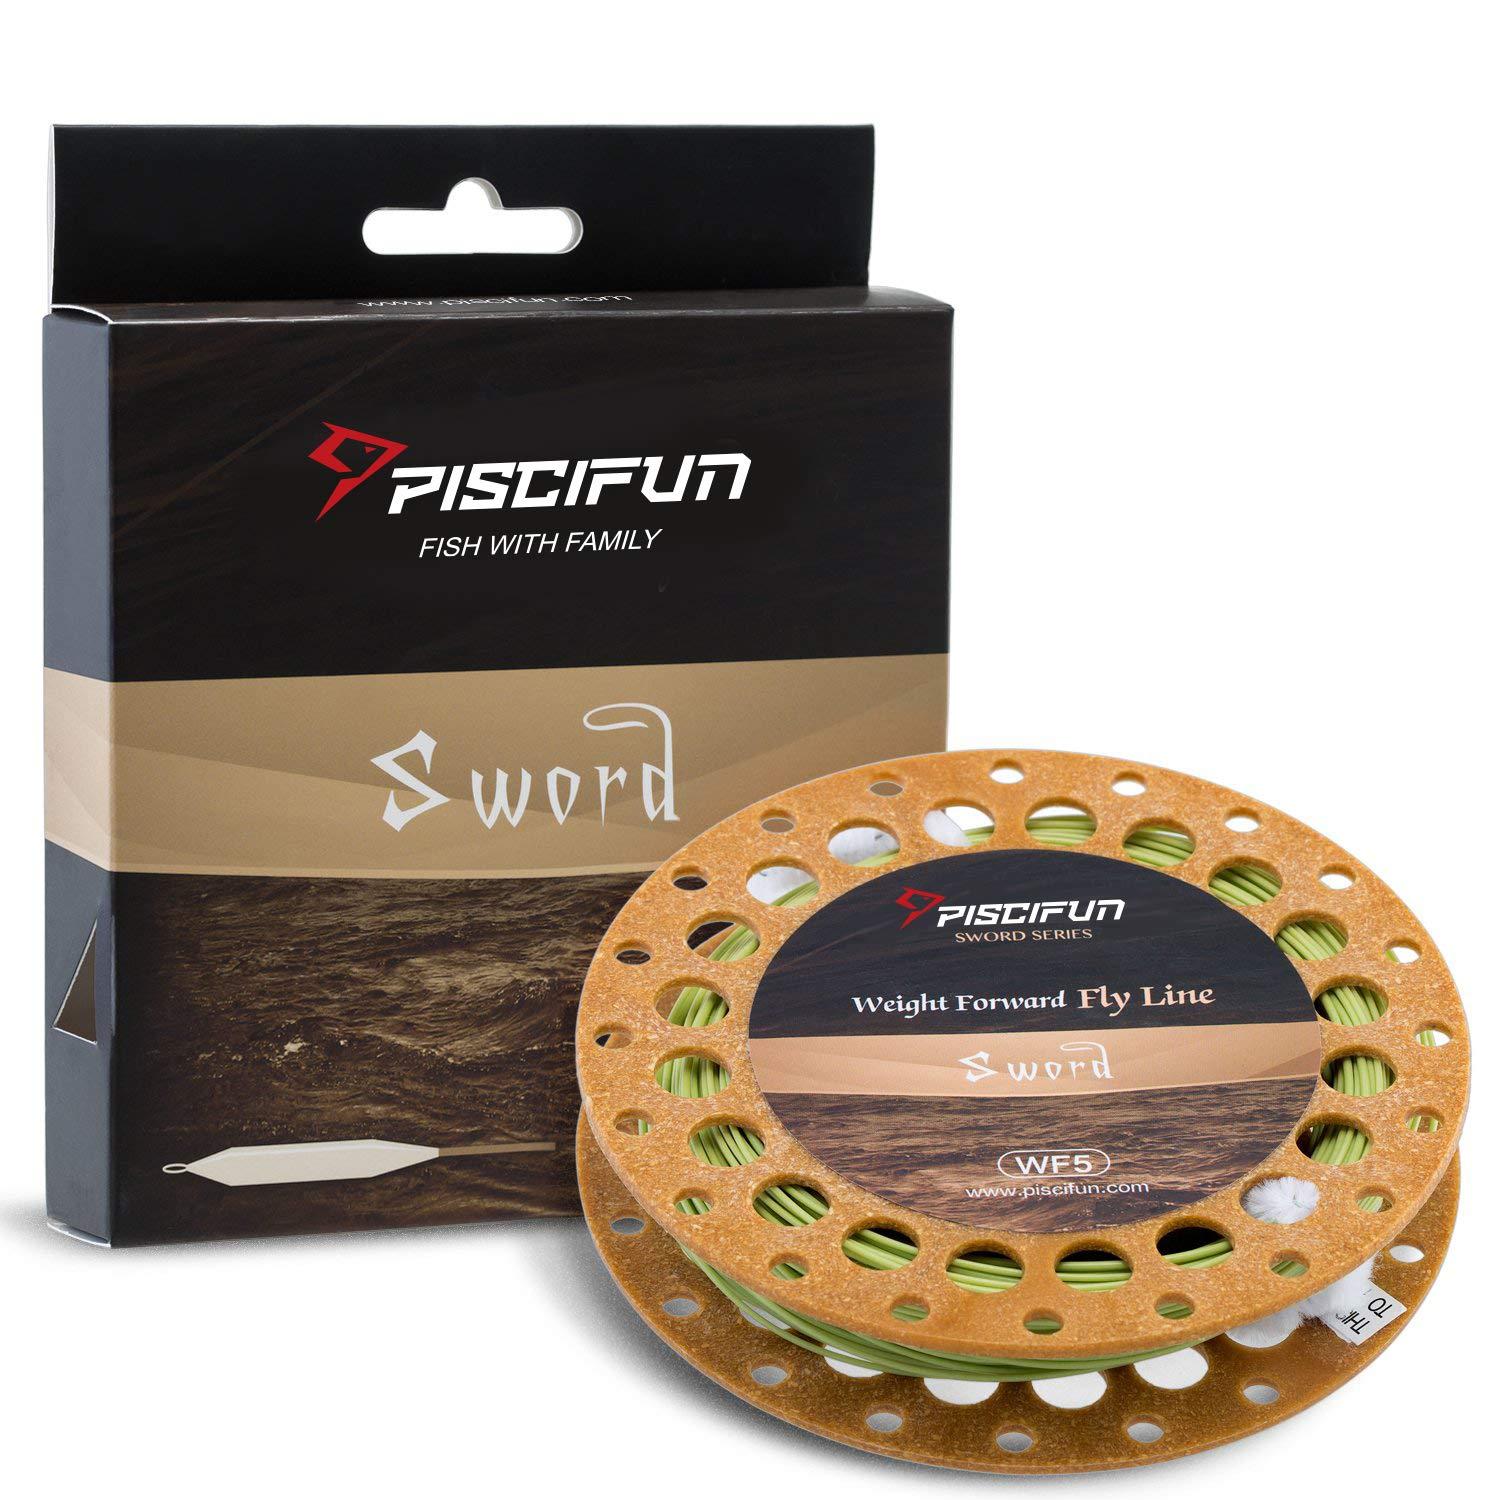 Piscifun Sword Fly Fishing Line with Welded Loop, Weight Forward Floating  Fly Line, WF1 2 3 4 5 6 7 8 9 10wt, 90 100FT Moss Green WF-4F 90FT